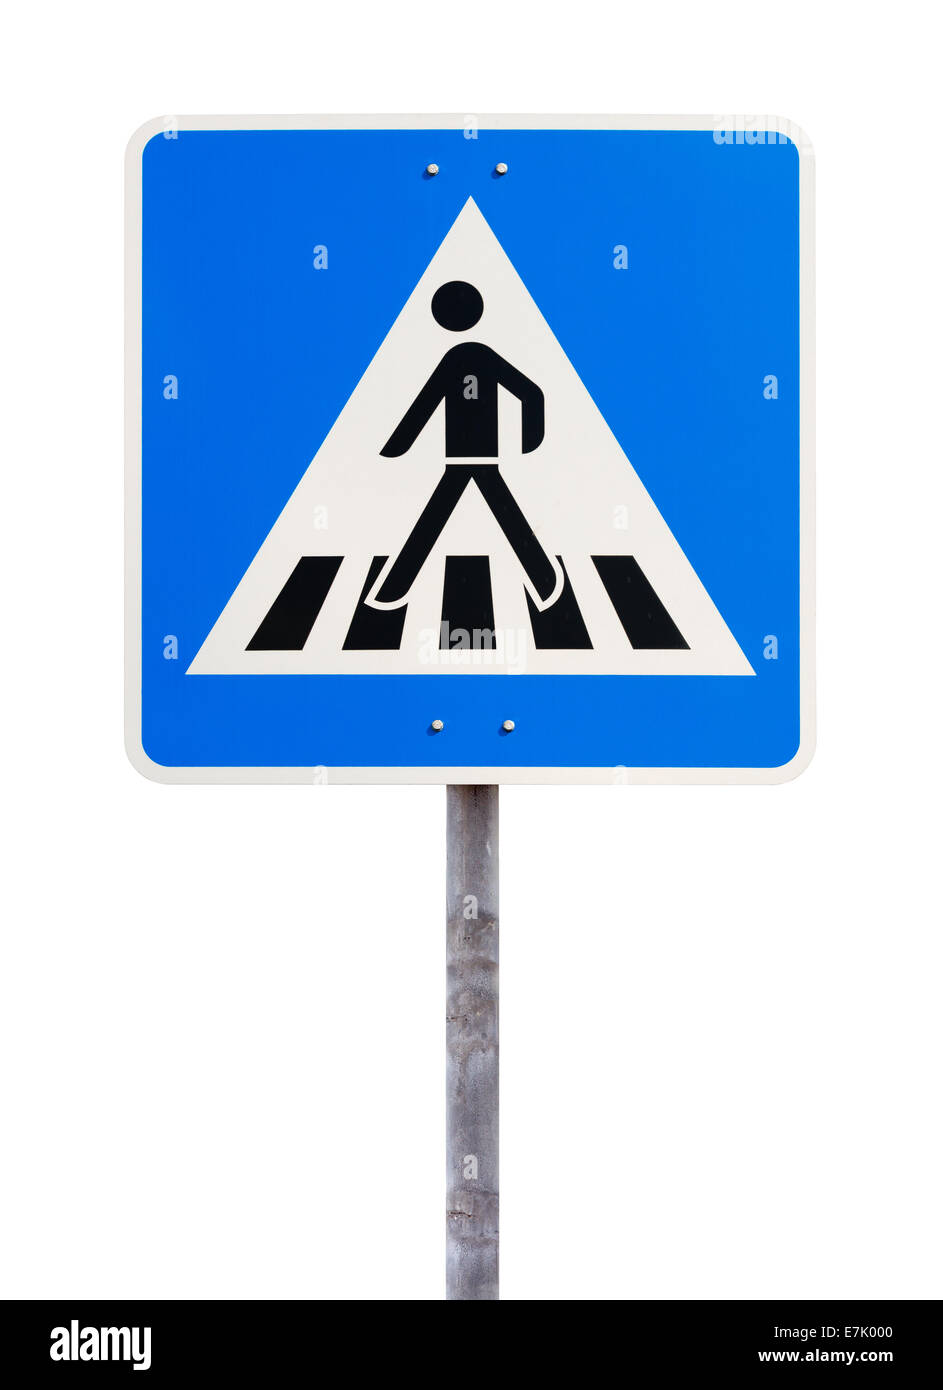 490+ Pedestrian Crossing Sign Stock Illustrations, Royalty-Free